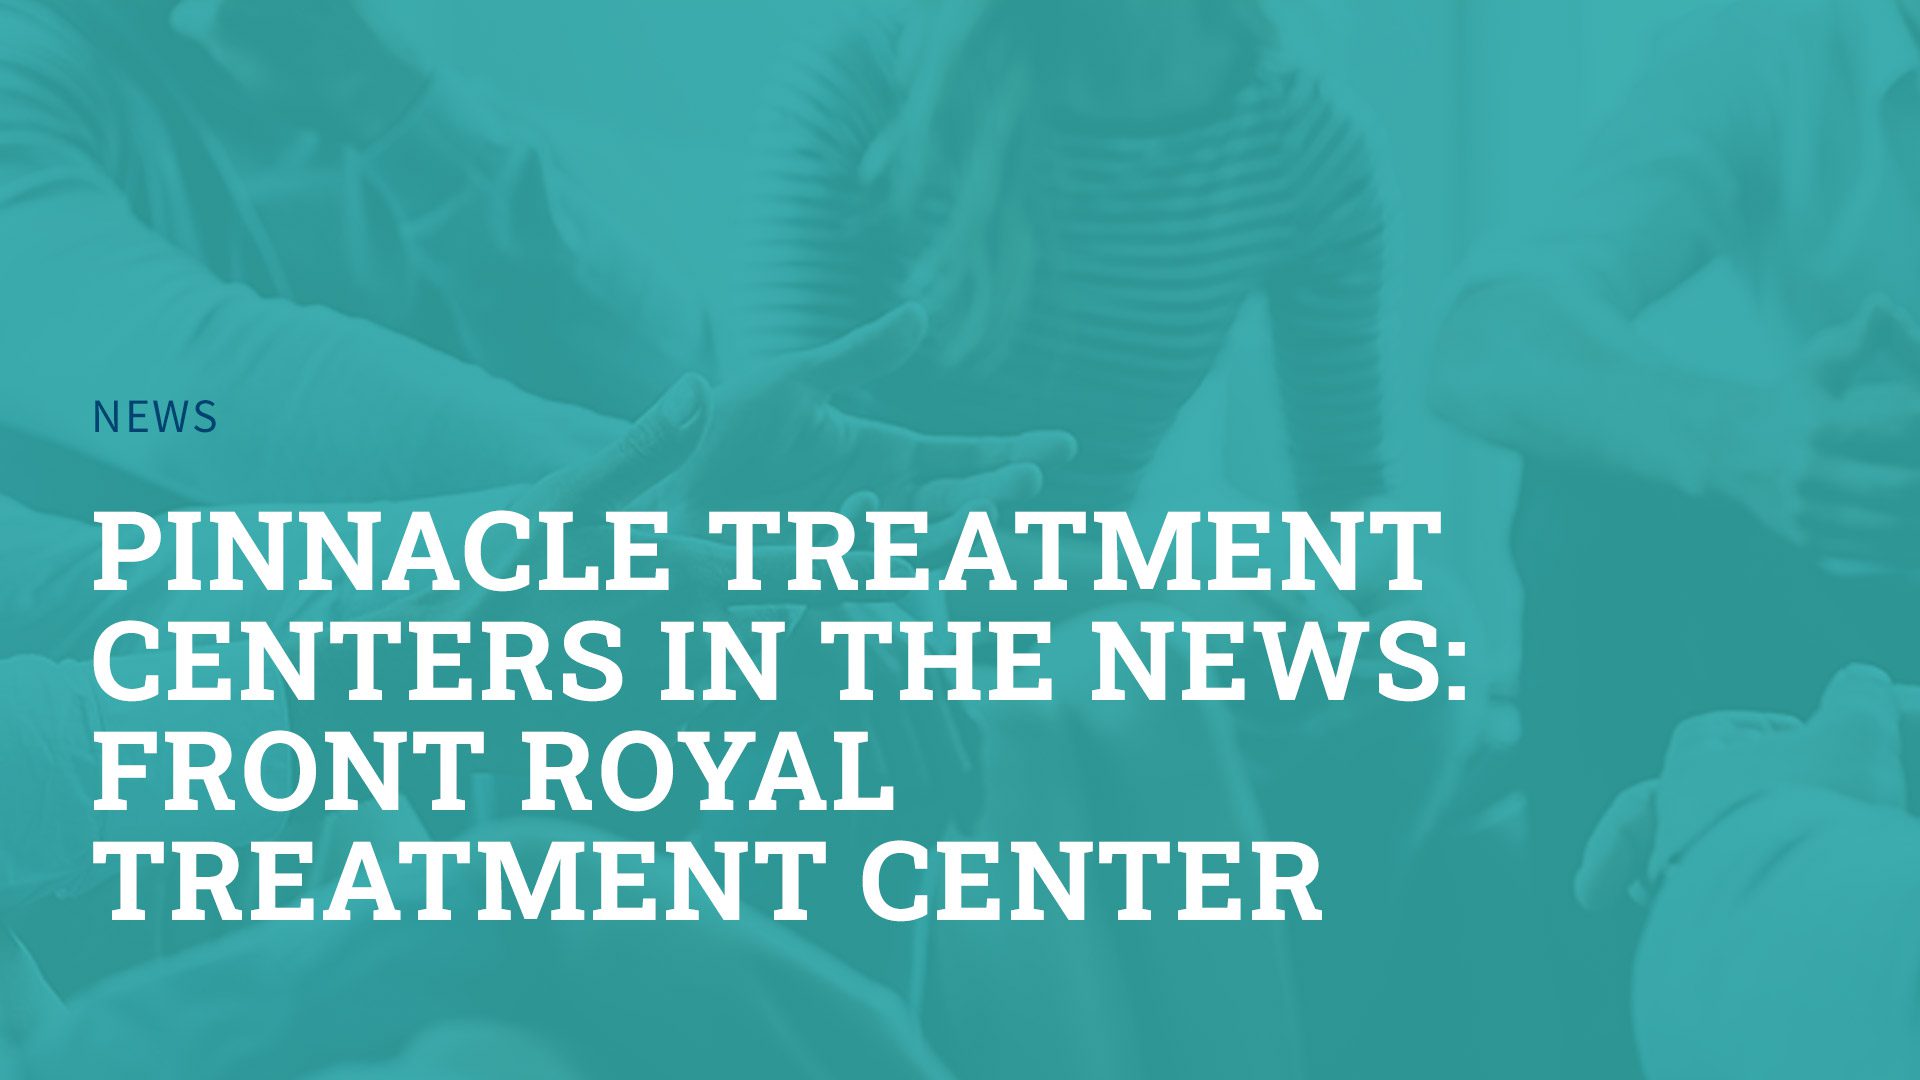 Graphic with headline "Pinnacle Treatment Centers in the News: Front Royal Treatment Center"